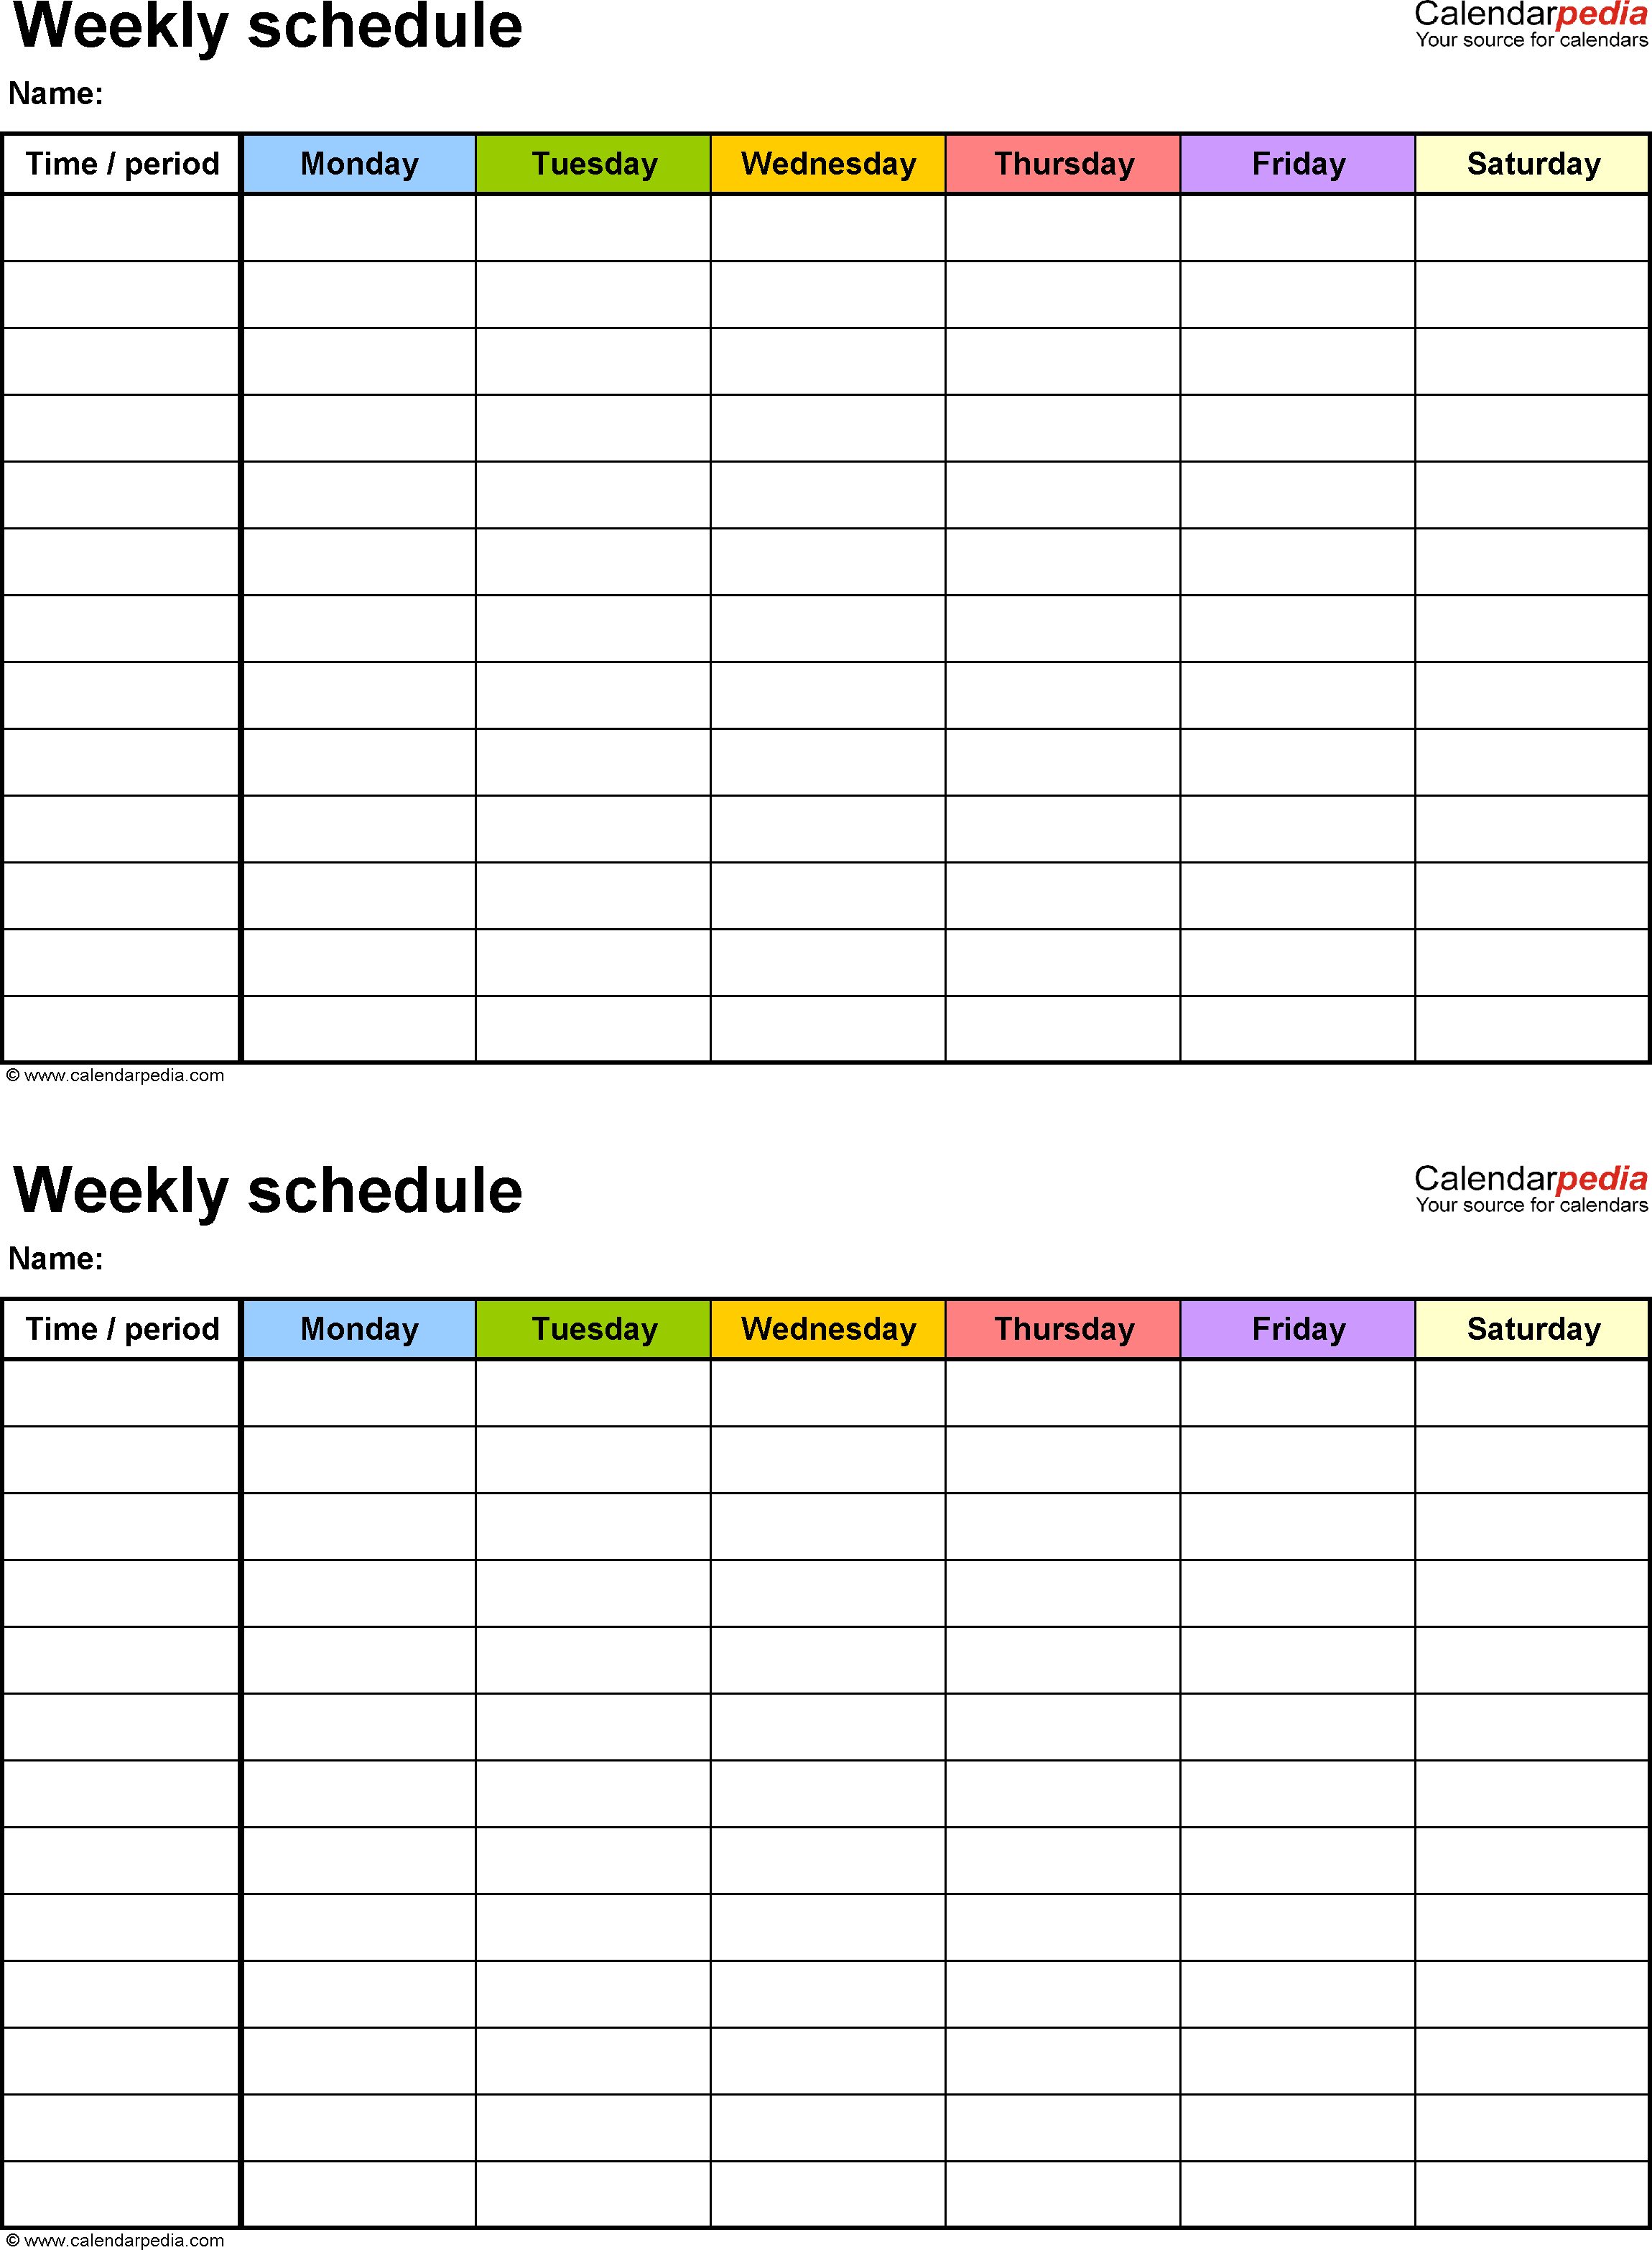 Weekly Schedule Template For Word Version 9: 2 Schedules On with regard to Monday Through Saturday Schedule Template